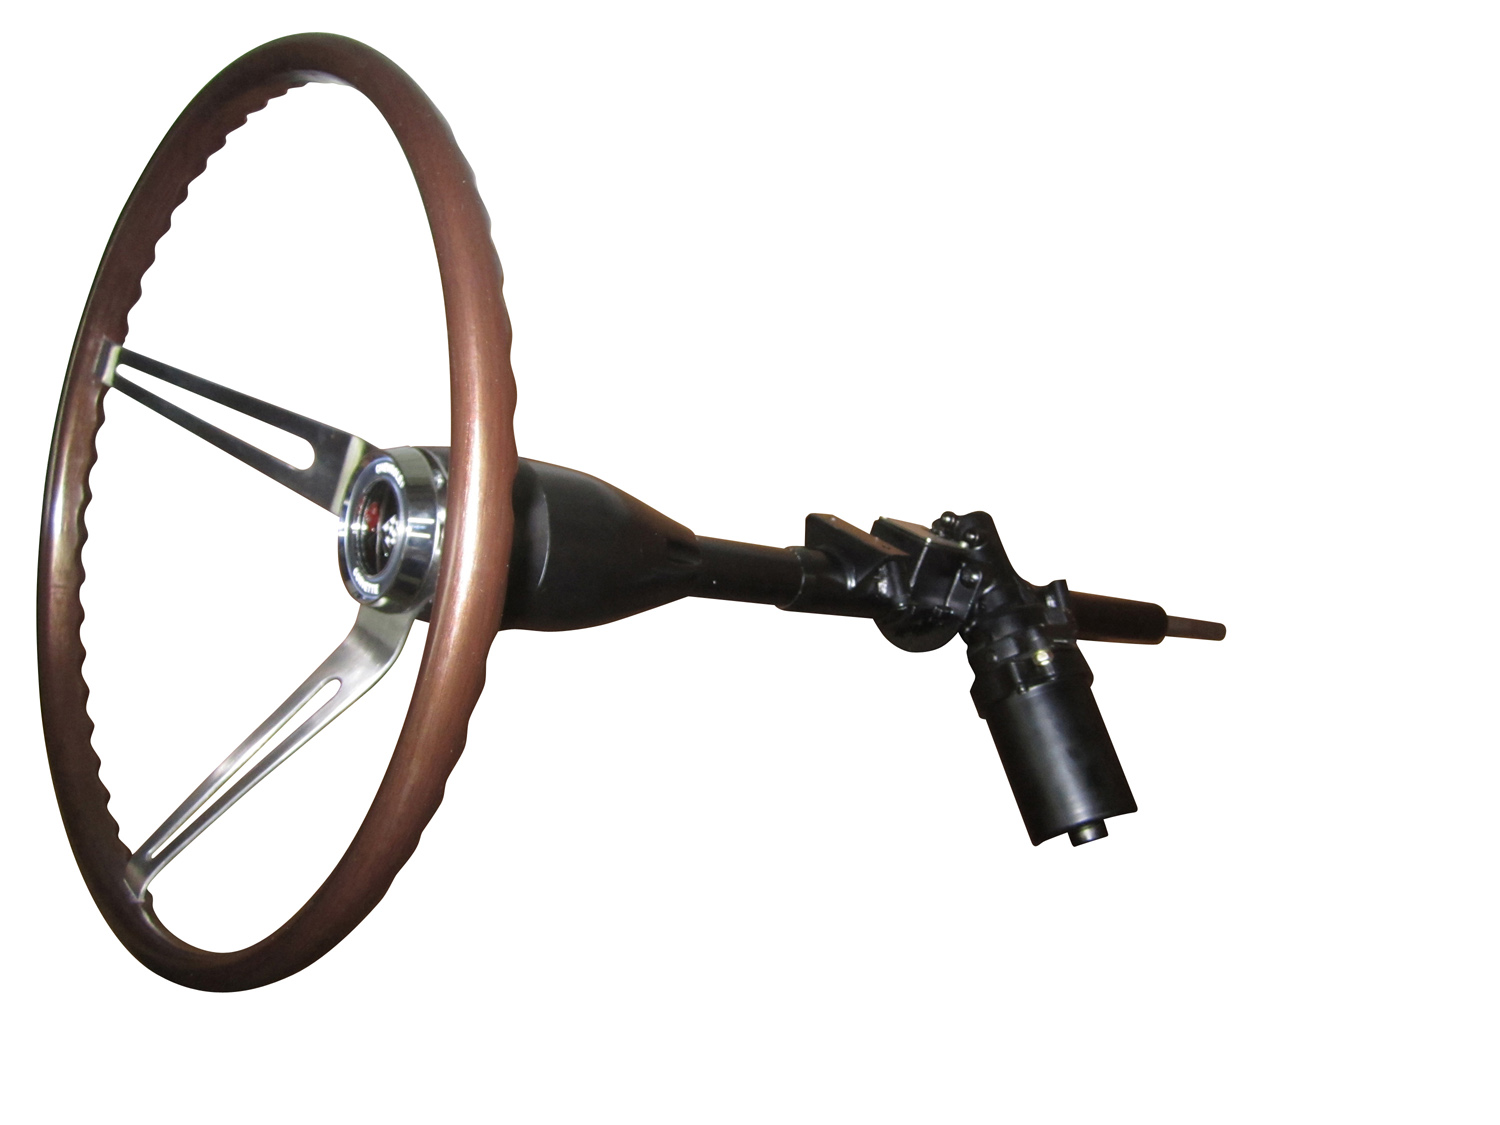 Electric power steering for classics and hot rods